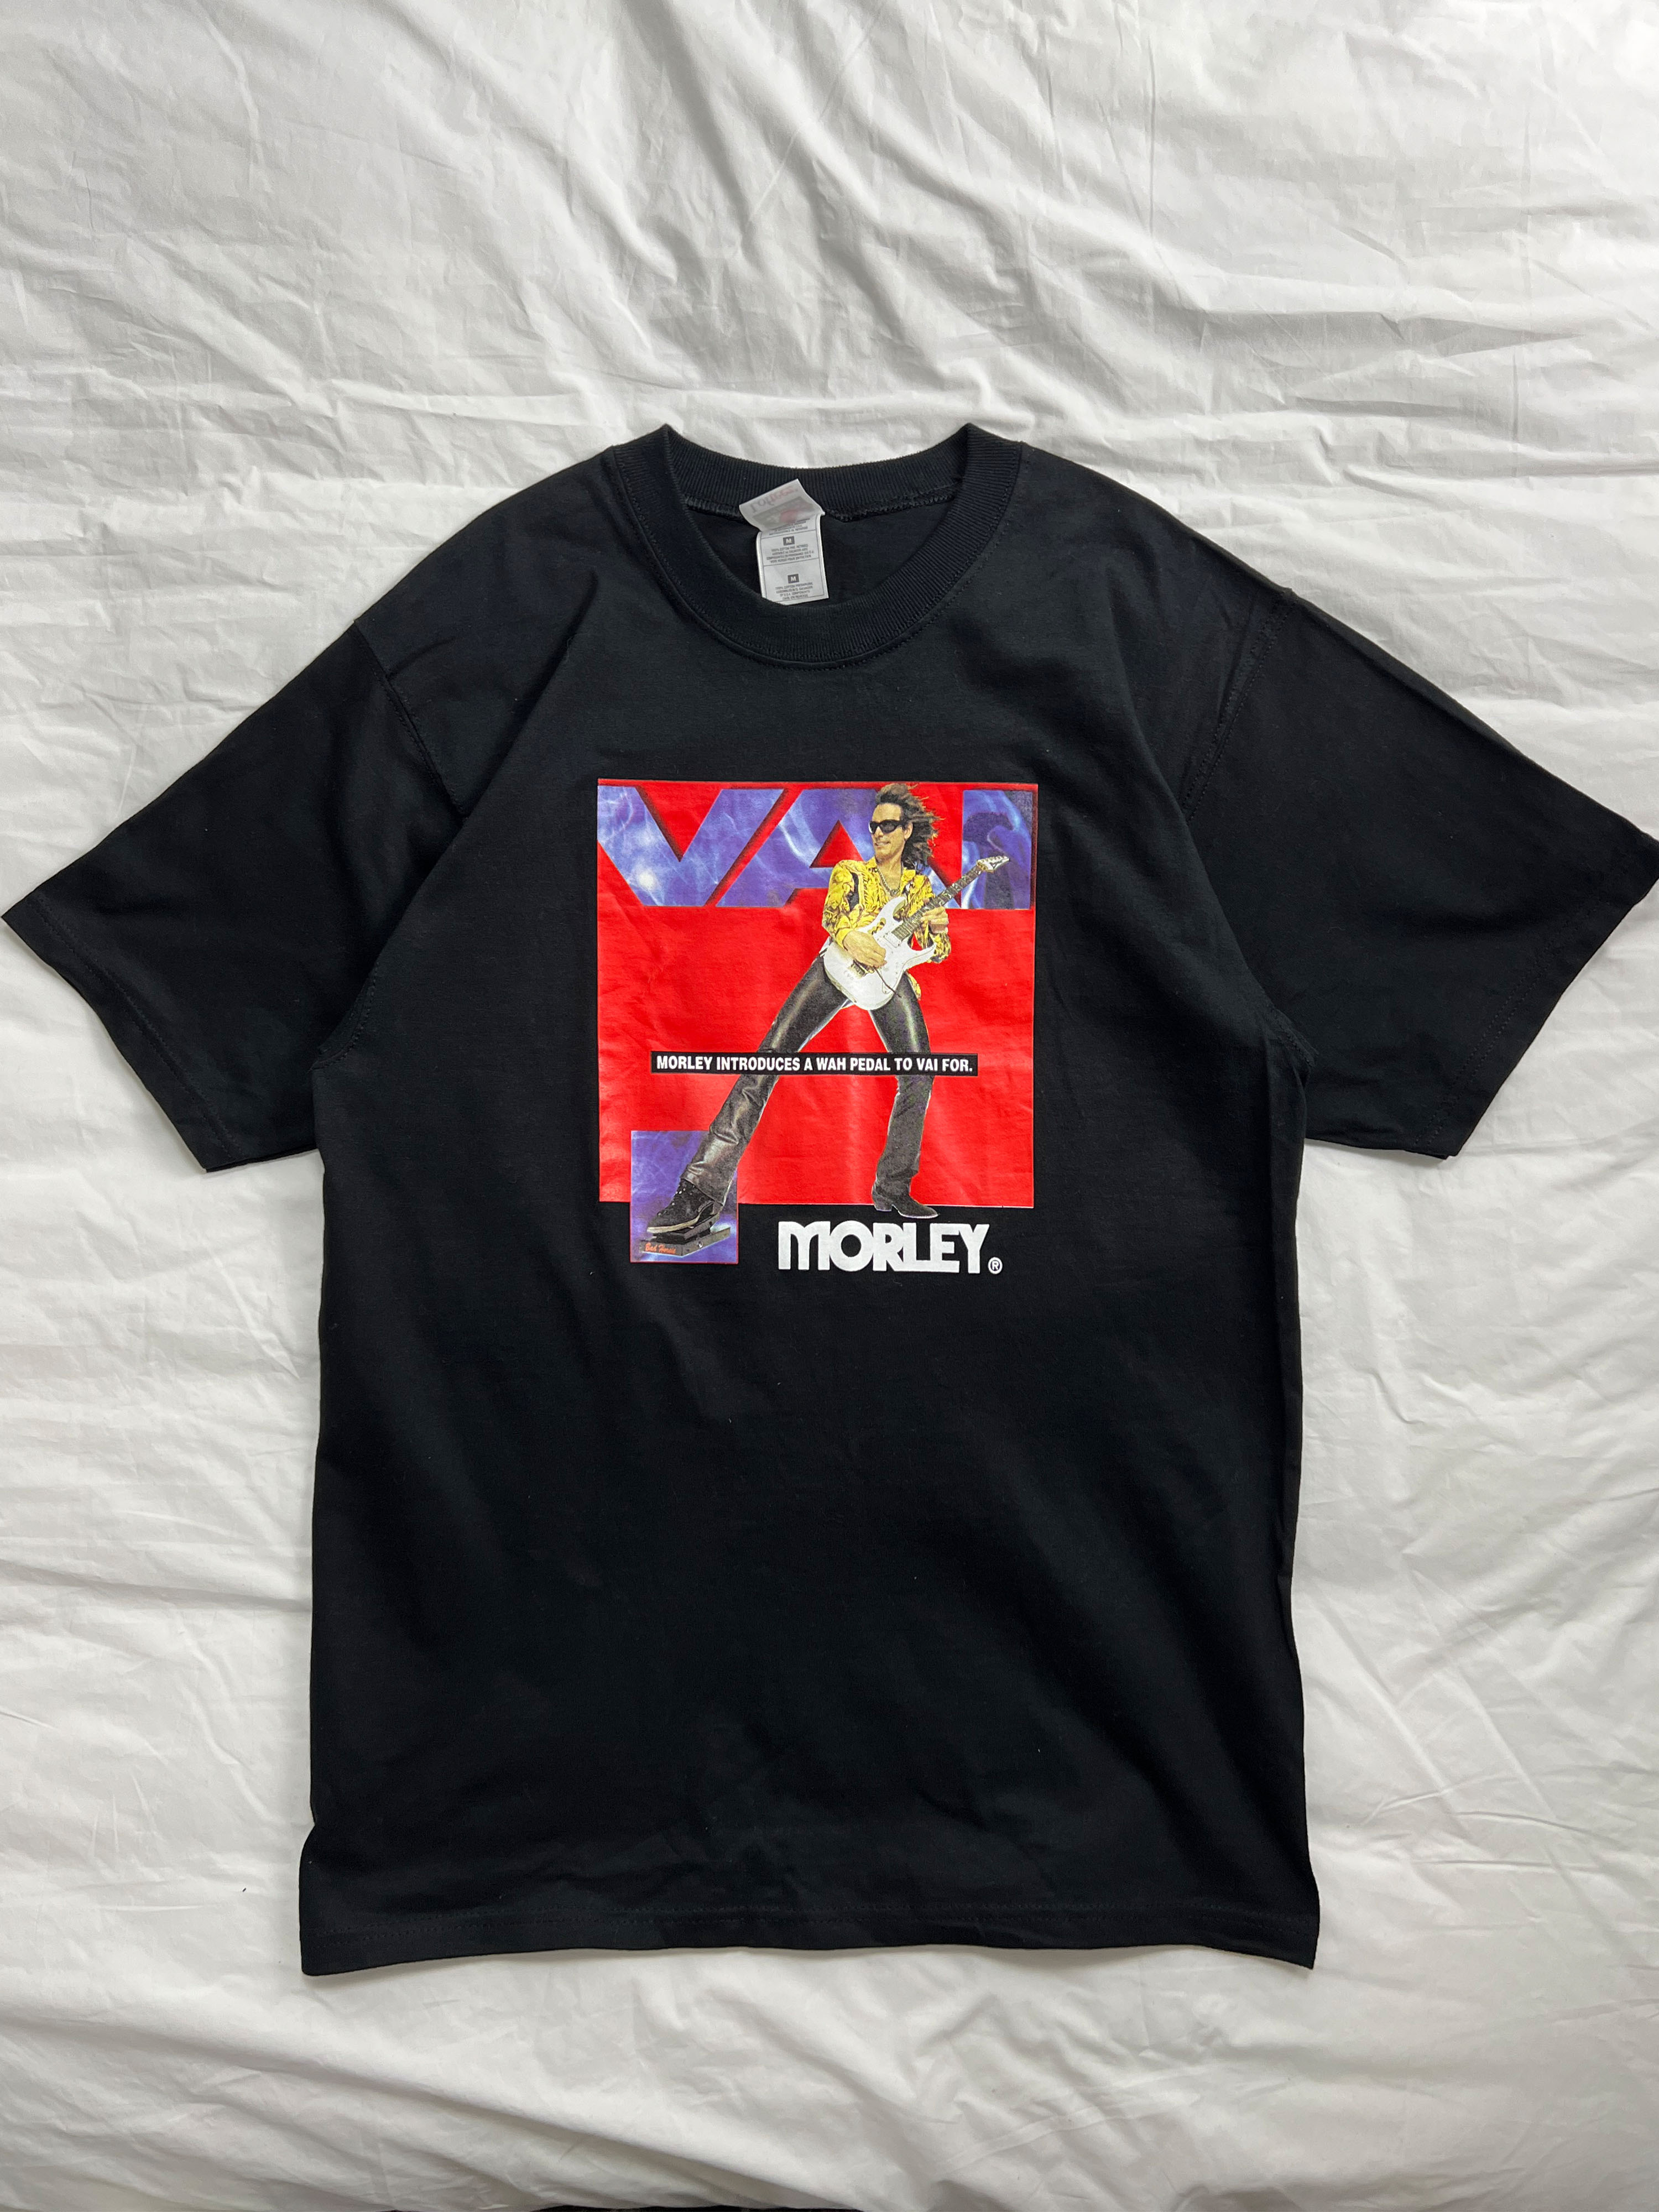 1998 MORLEY for STEVE VAI advertising t-shirts ( fruits of the loom )